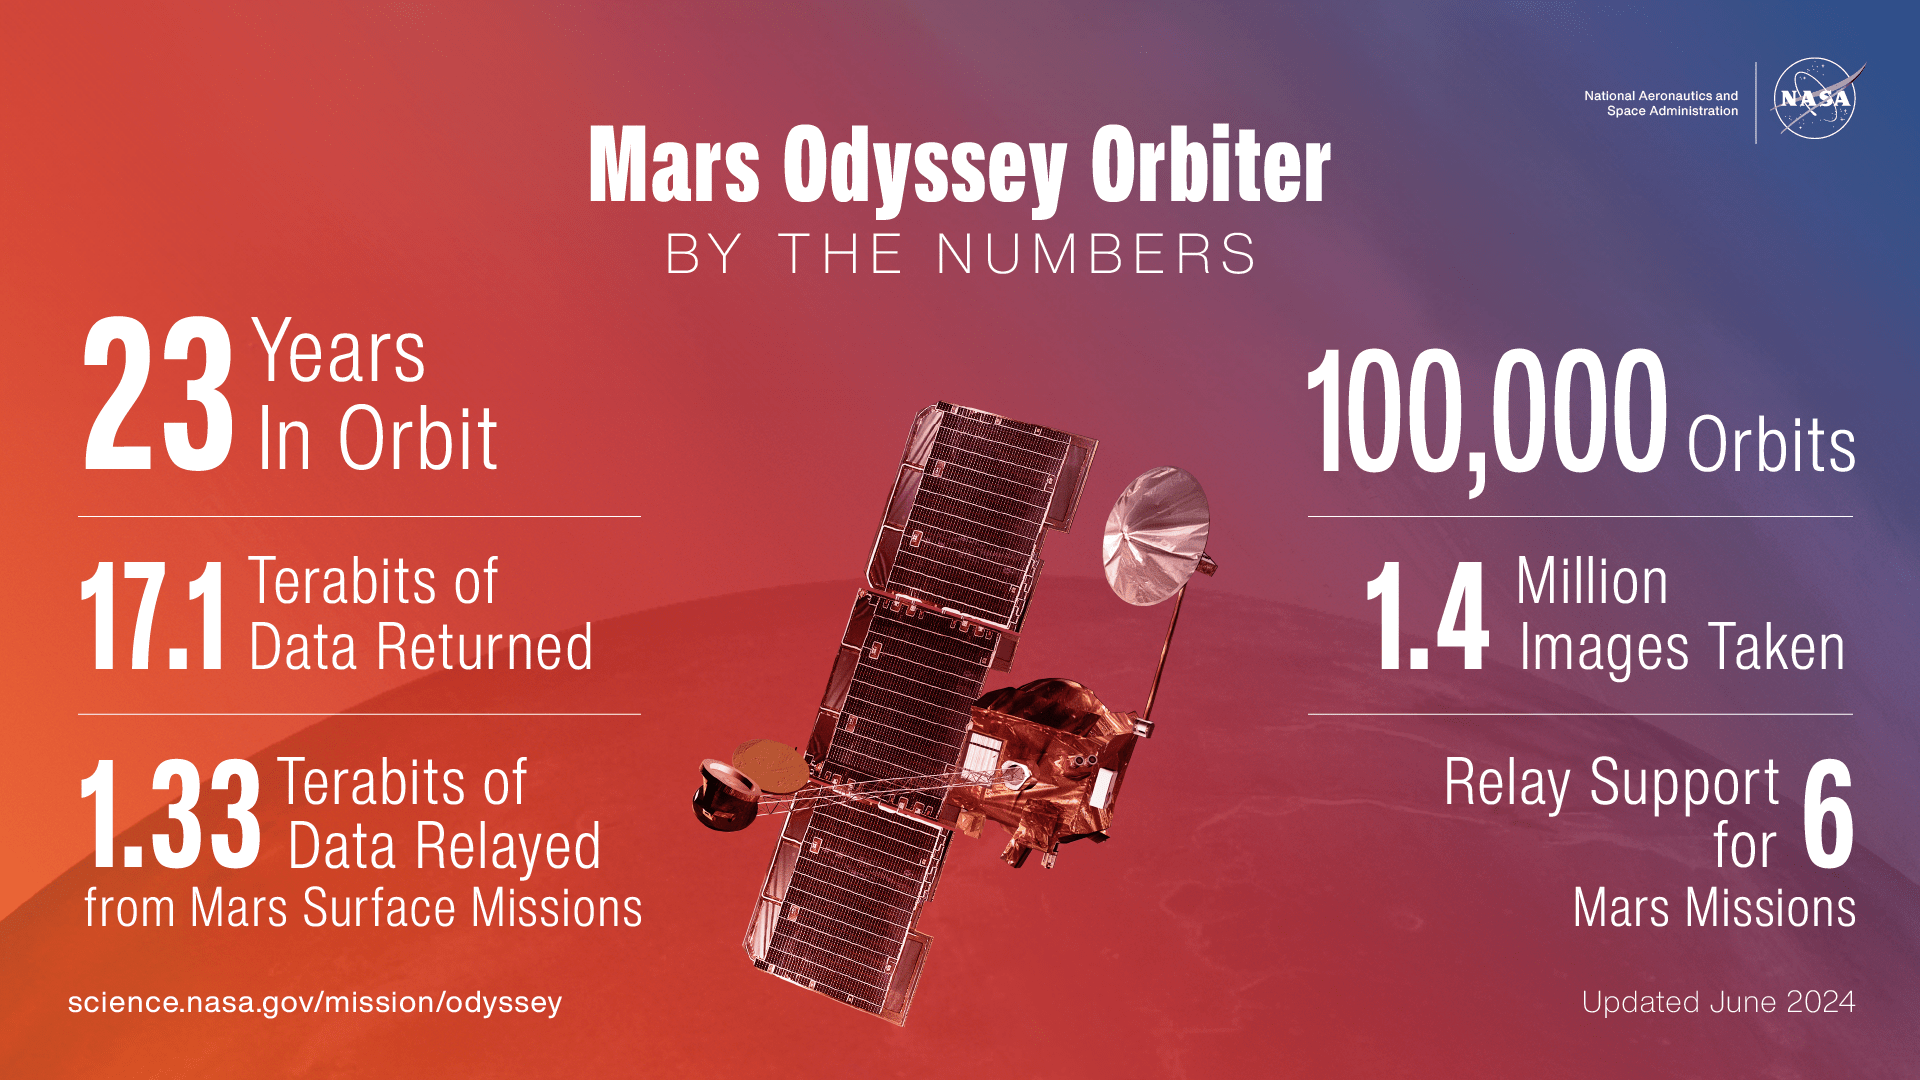 This infographic highlights just how much data and how many images NASA’s 2001 Mars Odyssey orbiter has collected in its 23 years of operation around the Red Planet.